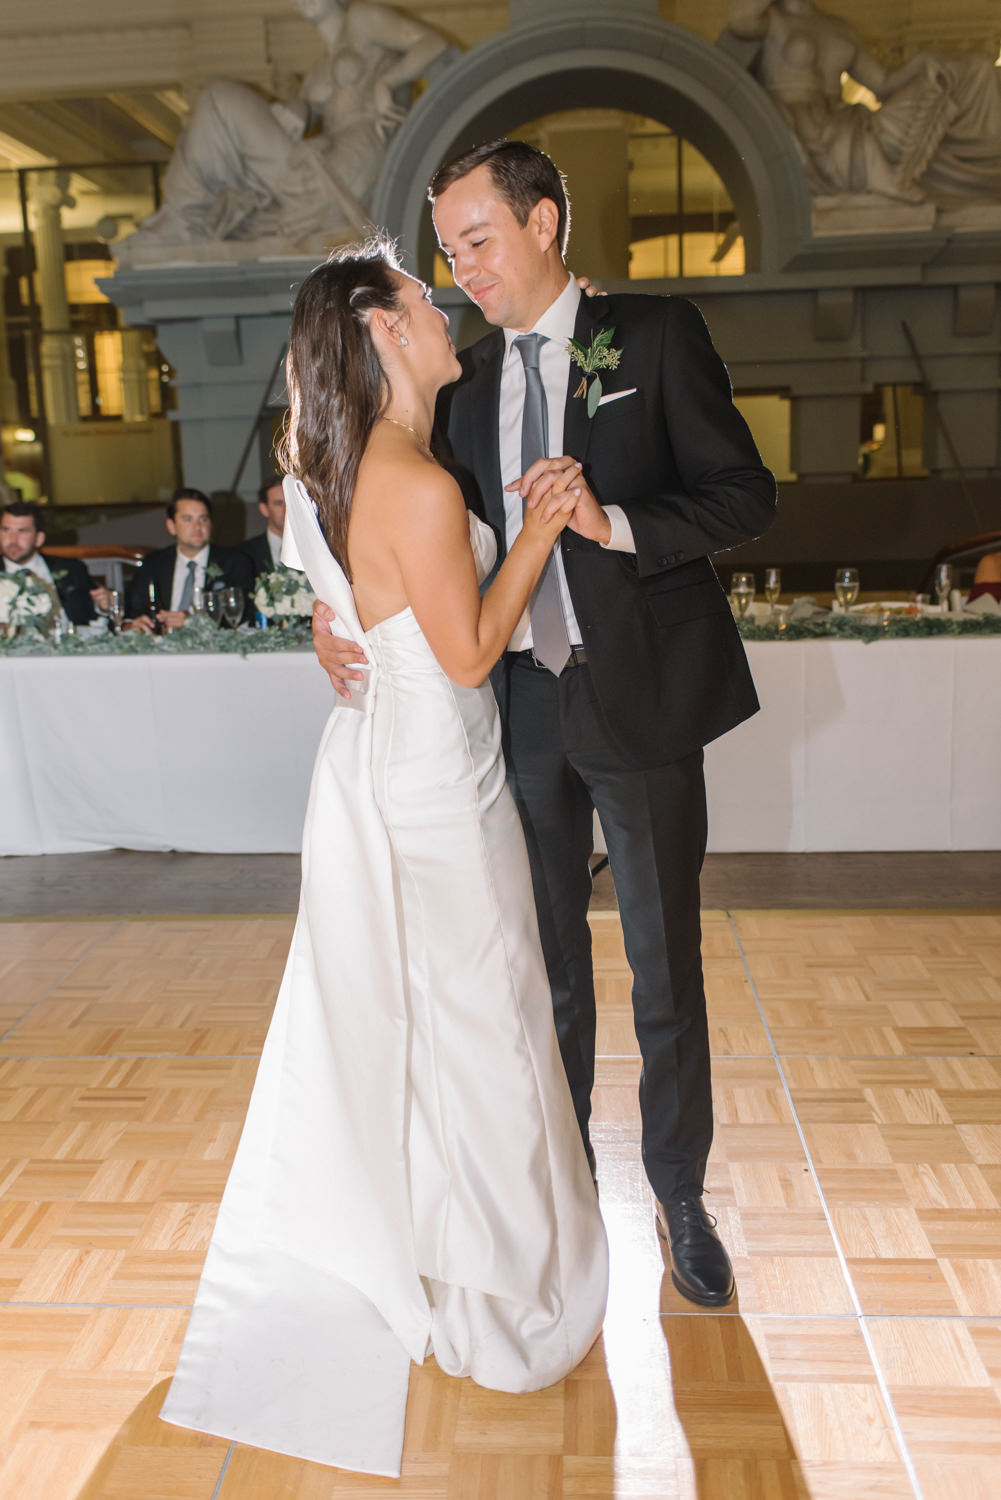 Bride and groom first dance at St. Louis Old Post Office and Custom House; St. Louis fine art film wedding photographer Erica Robnett Photography